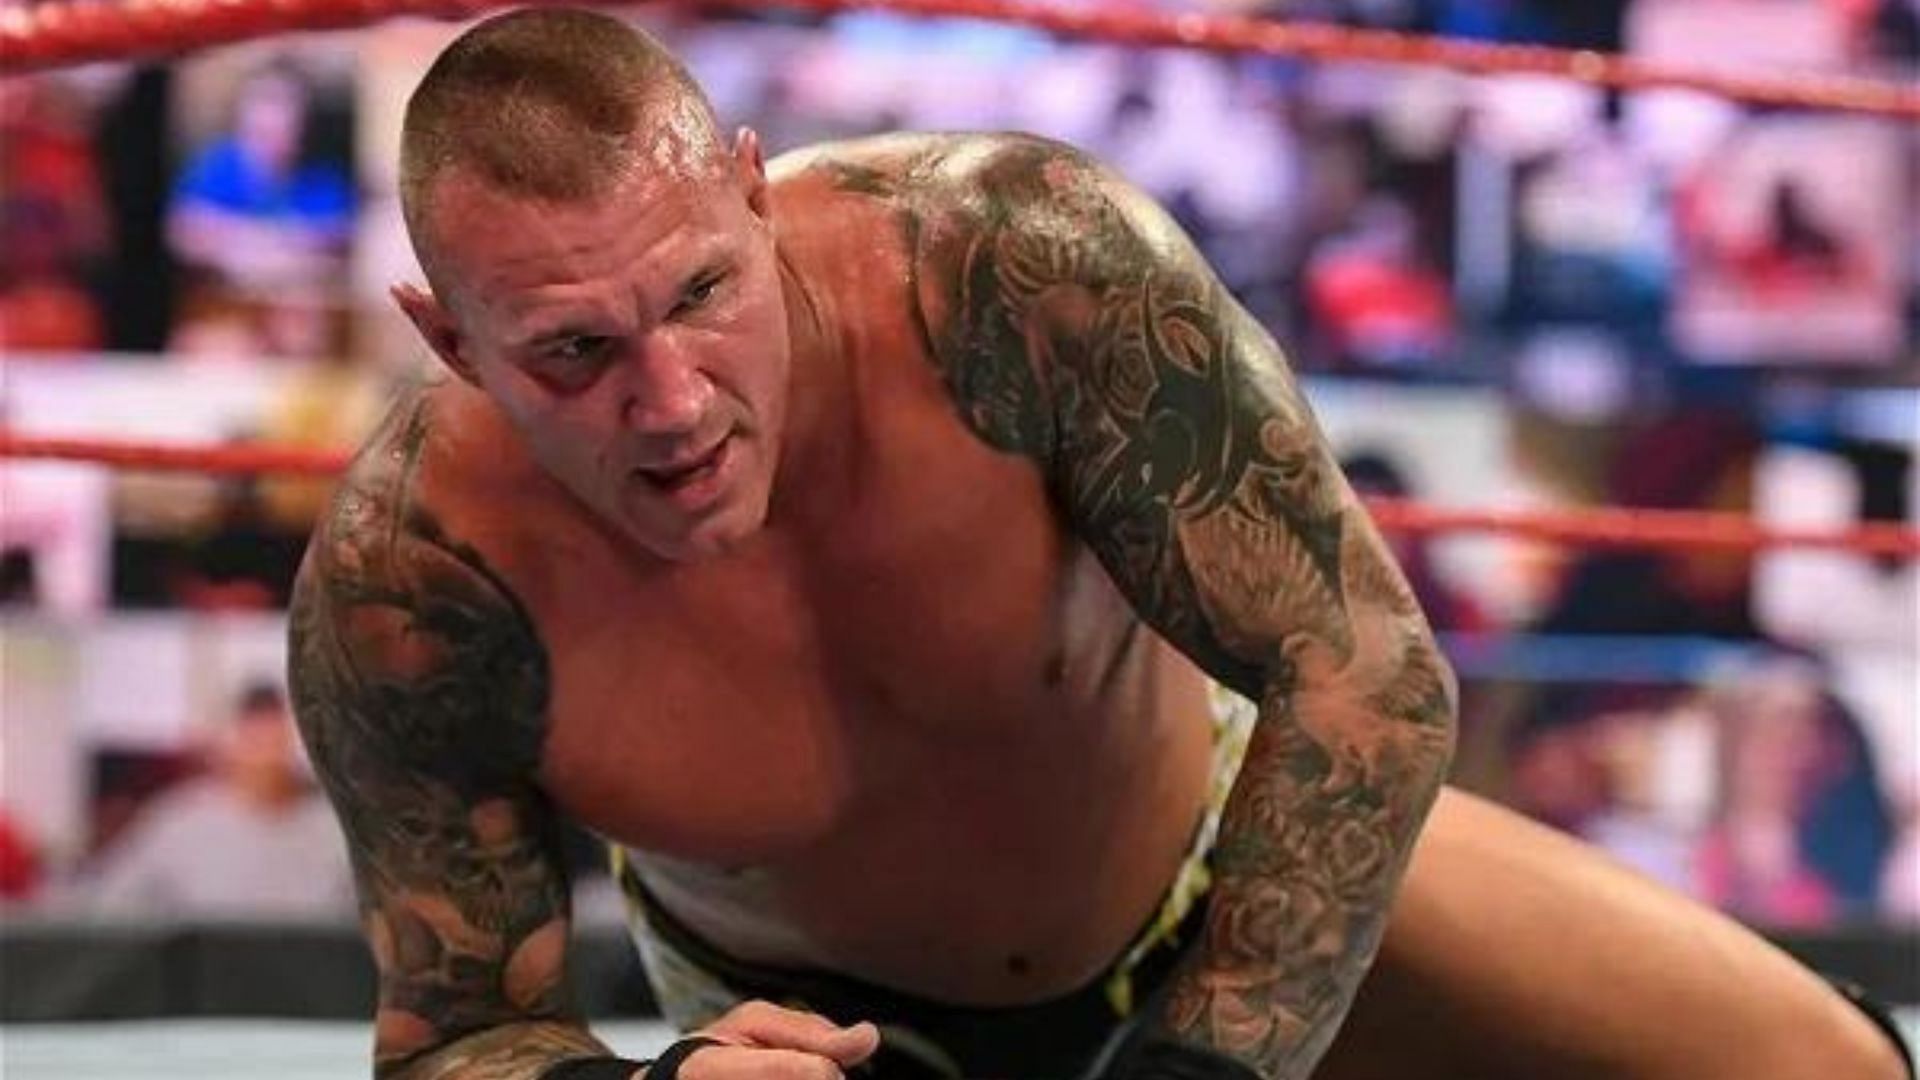 What does Randy Orton plan to do next in WWE?